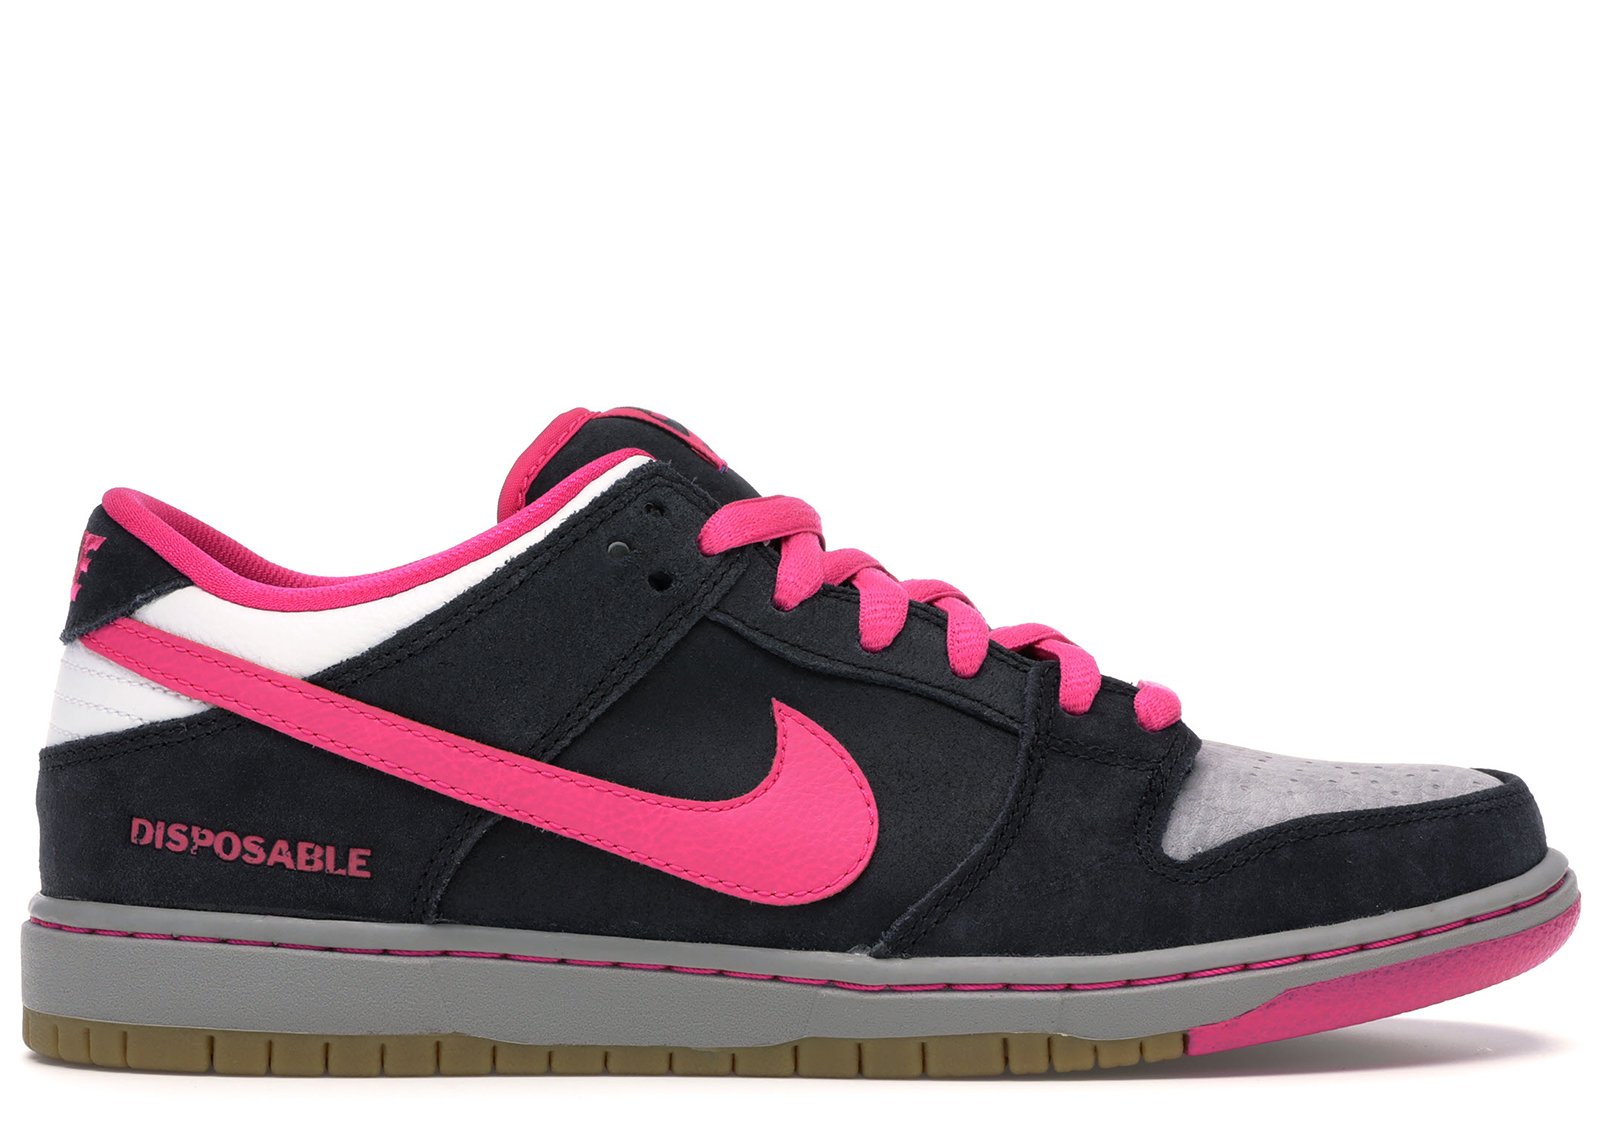 Nike SB Dunk Low Disposable sneakers